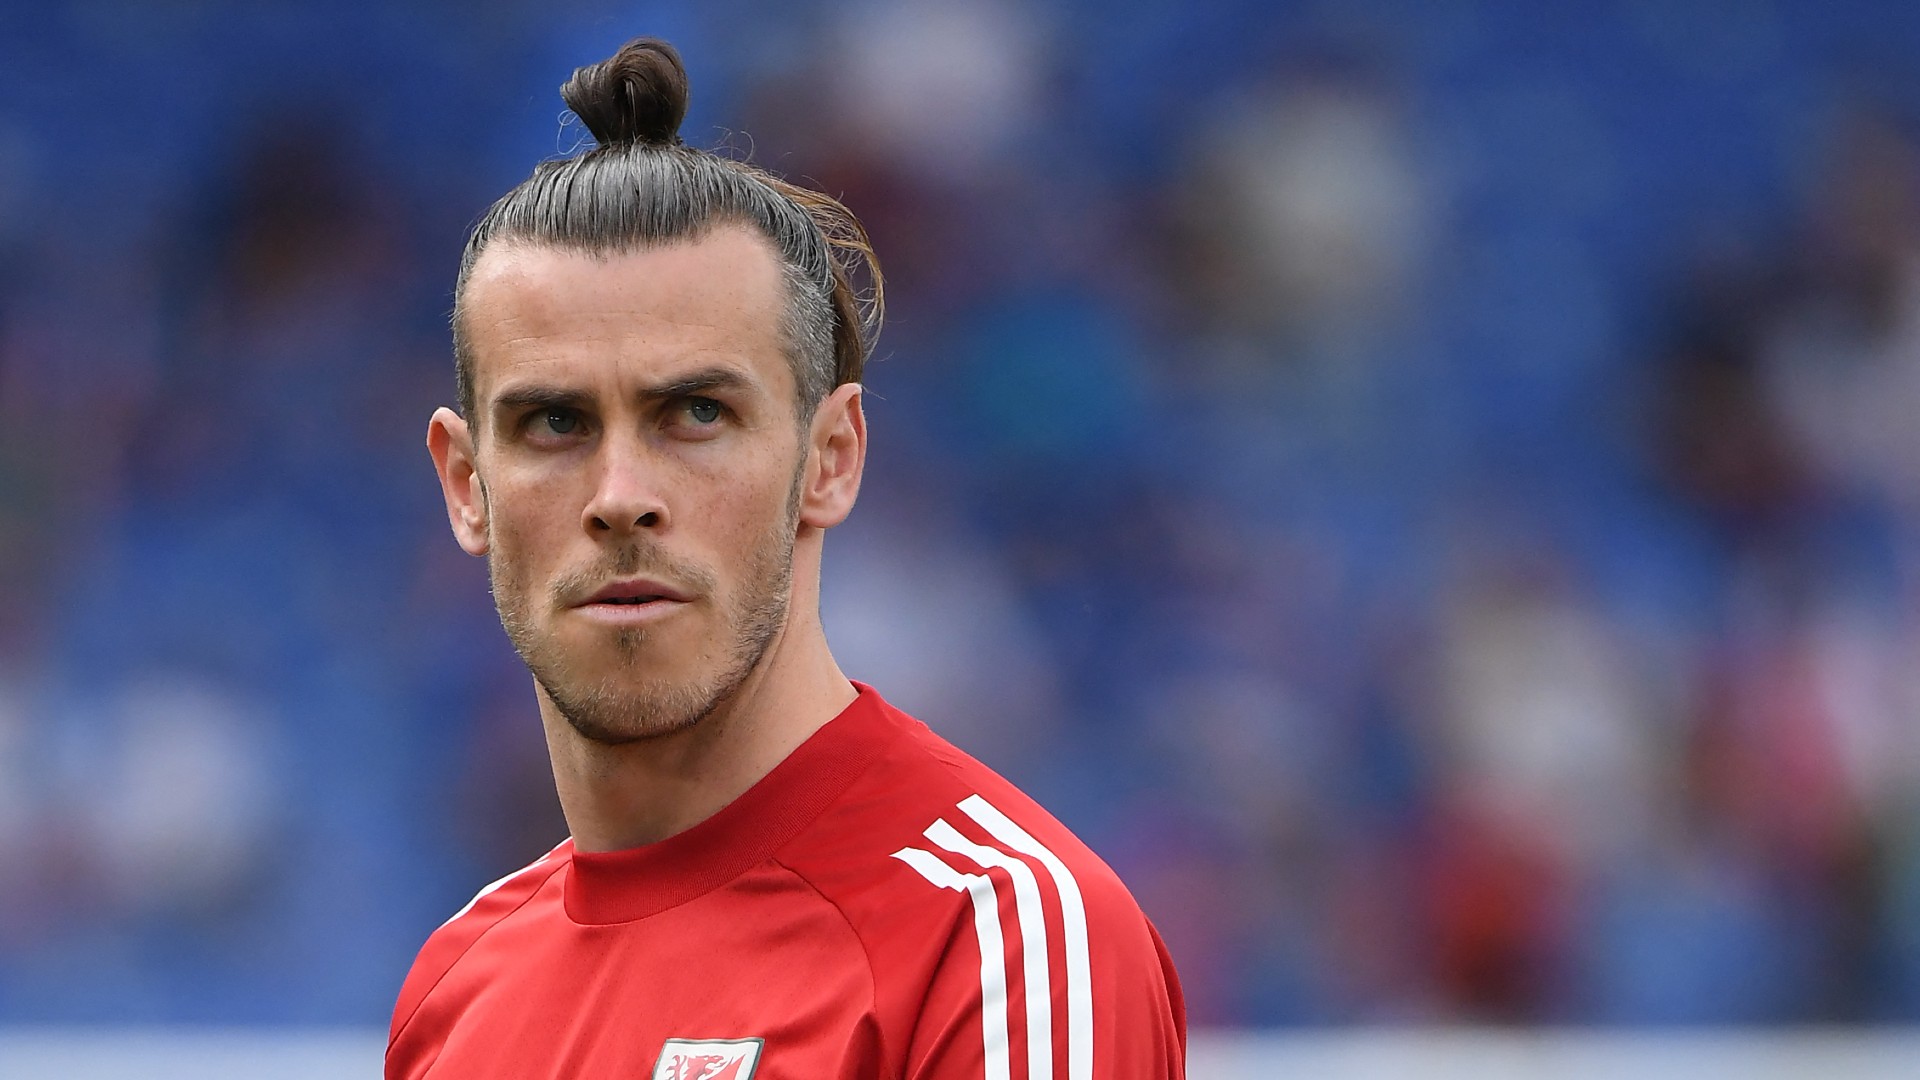 'I'll continue with Wales until the day I stop playing' - Bale clarifies future after walking out of interview post-Euro 2020 exit